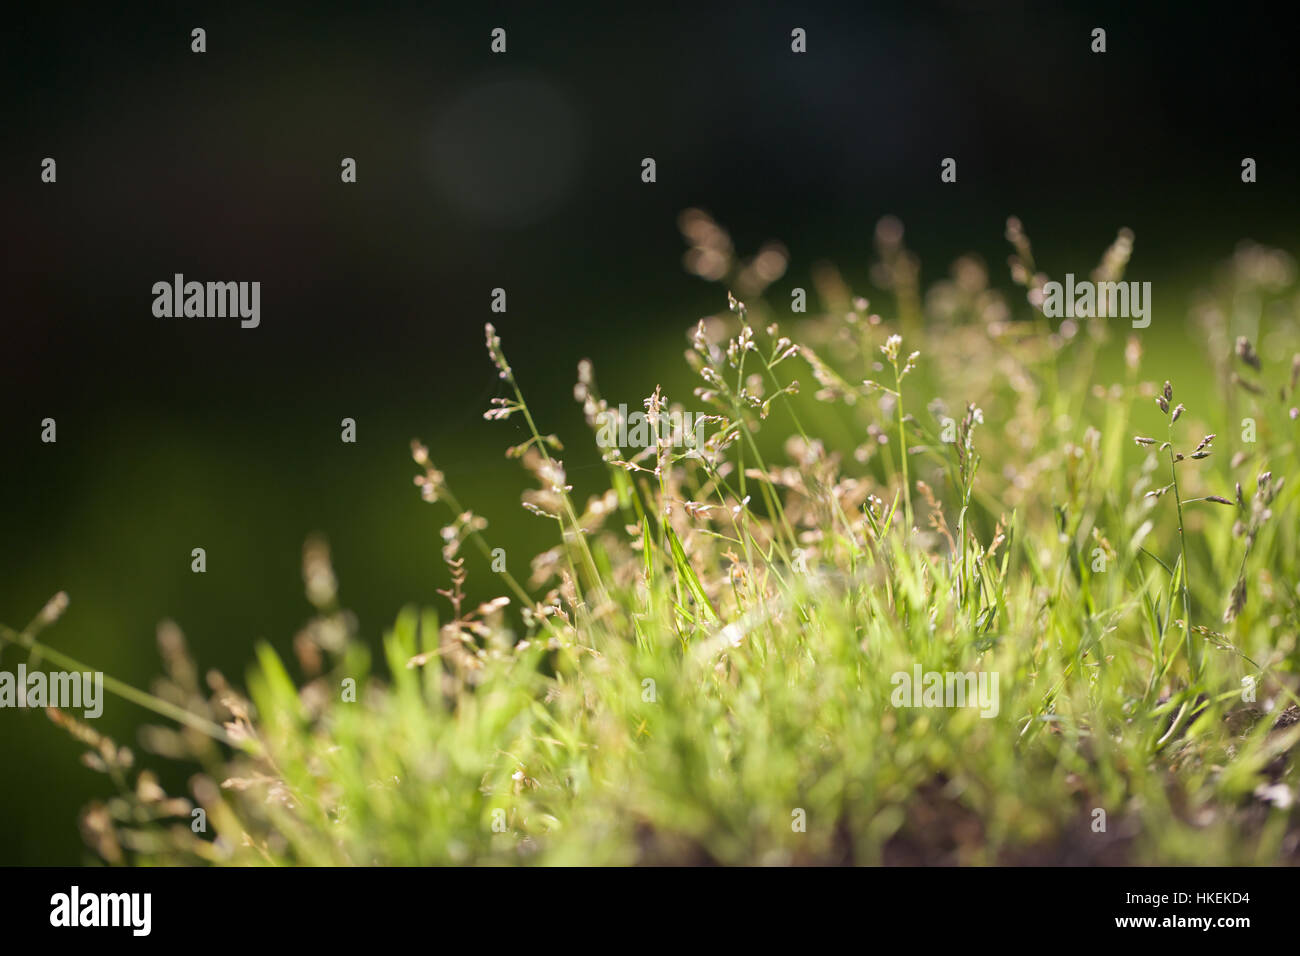 green grass and flowers. nature, growth, botany, lush. Stock Photo